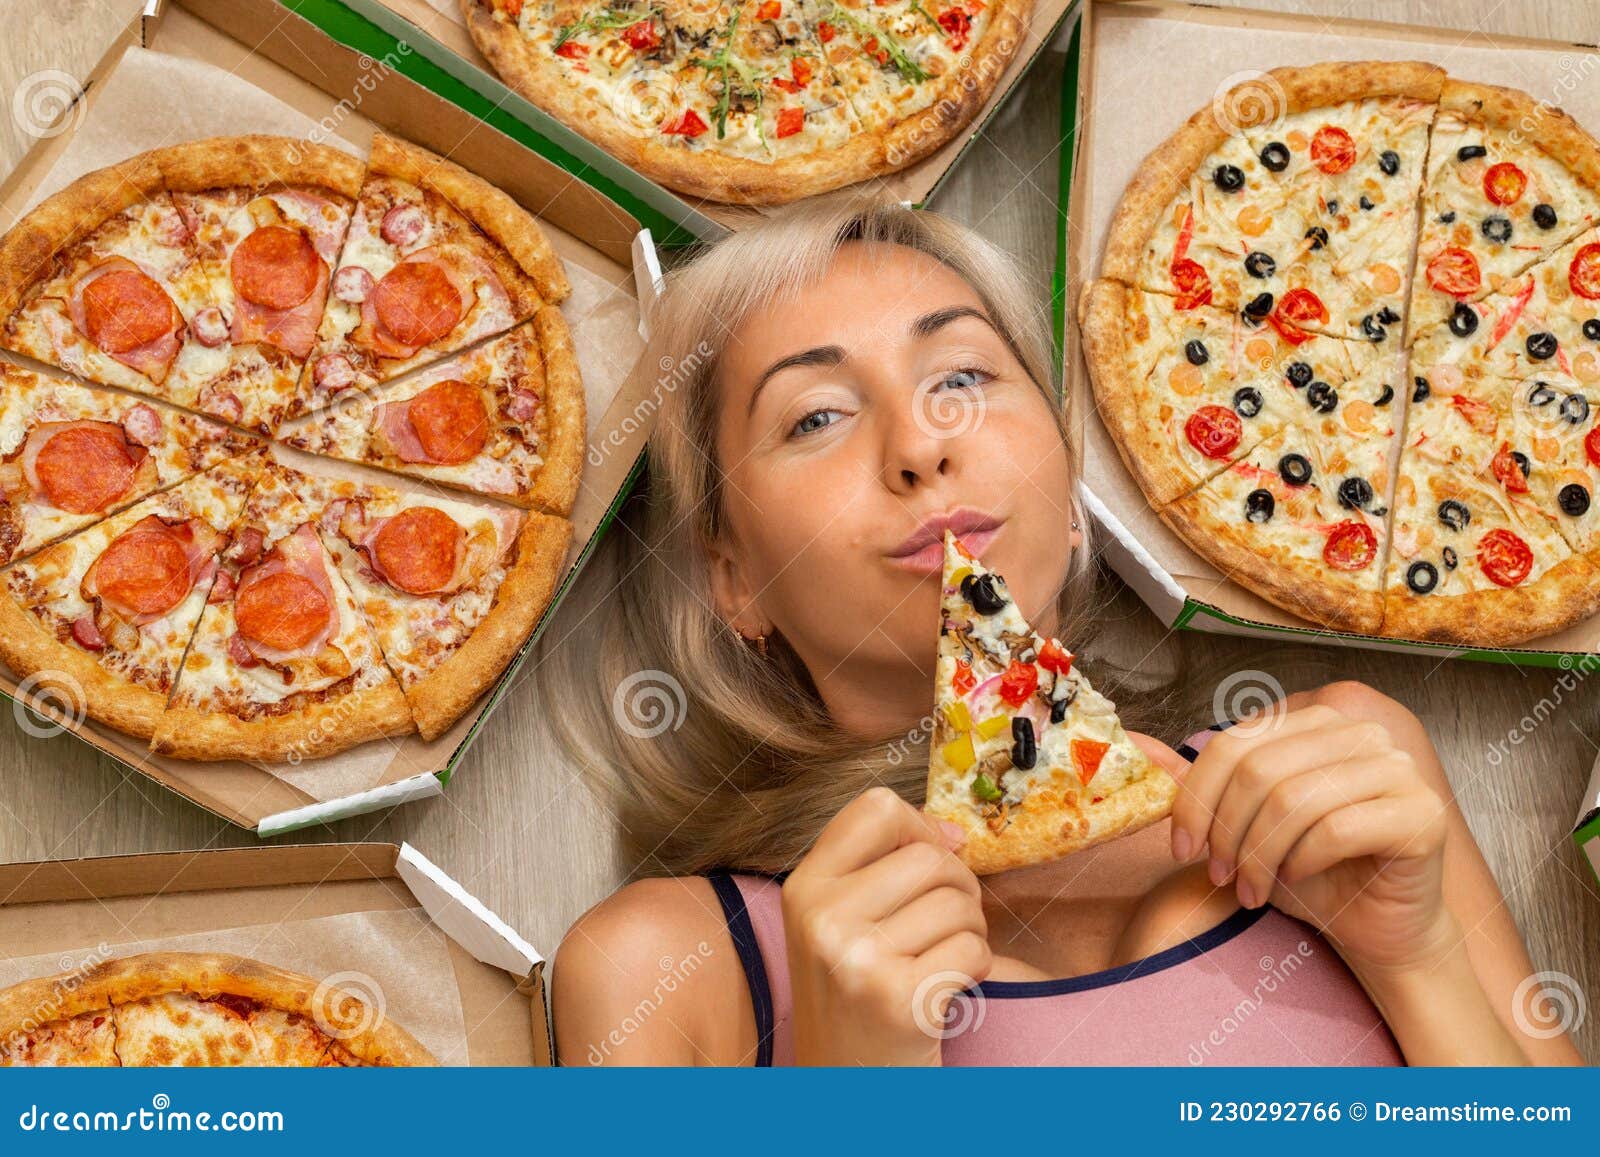 A Young Girl With Blond Hair In A Pink Tank Top Is Holding A Slice Of 